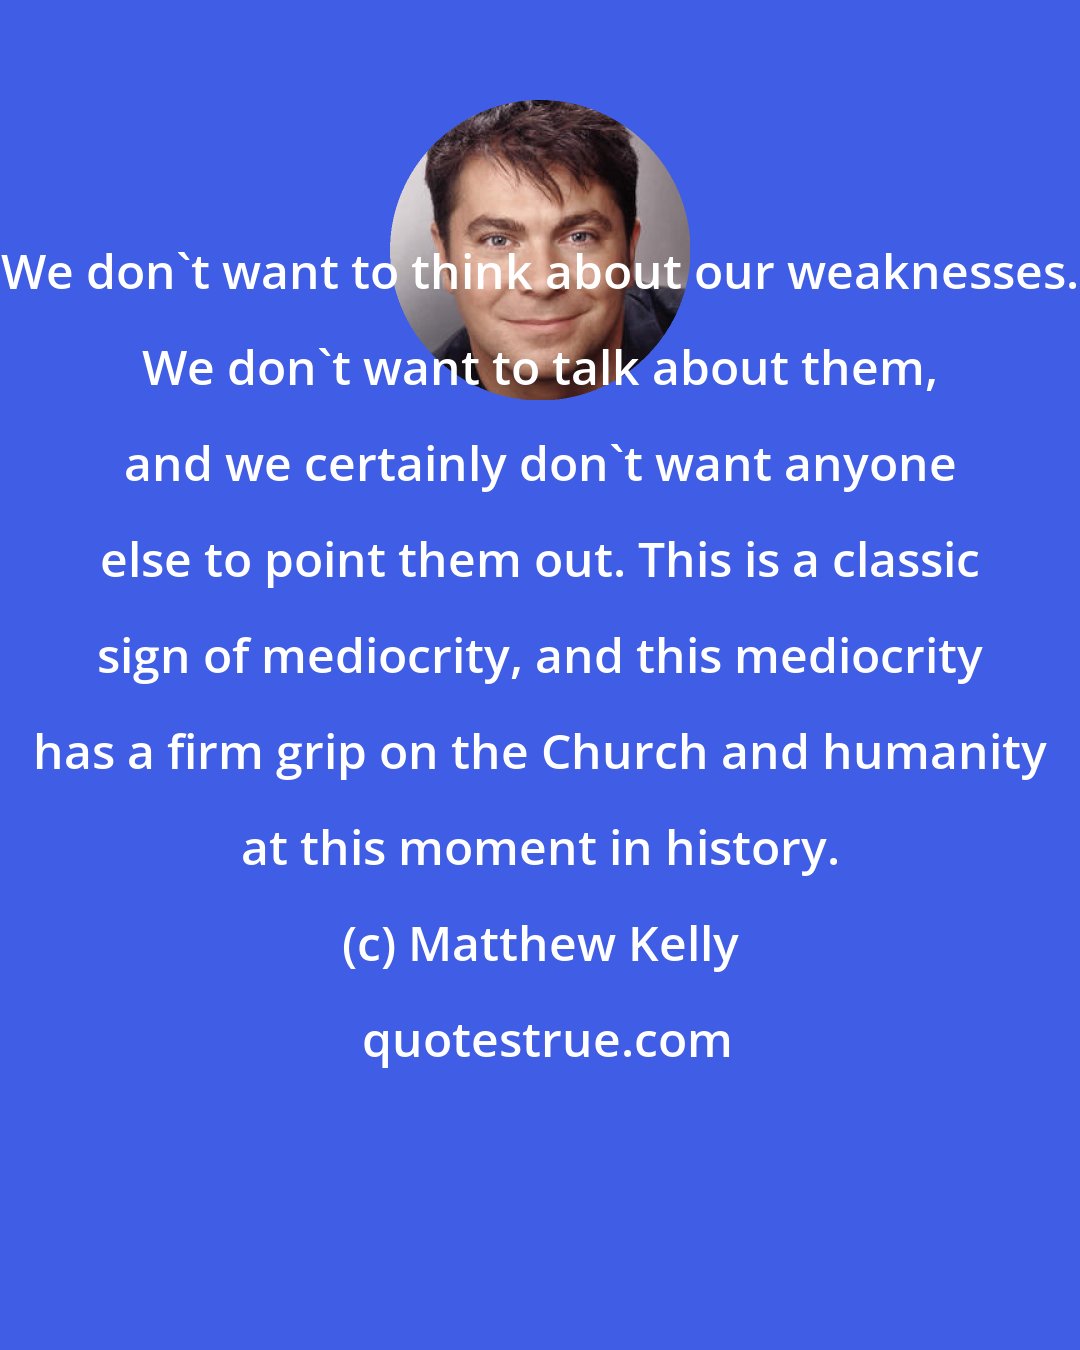 Matthew Kelly: We don't want to think about our weaknesses. We don't want to talk about them, and we certainly don't want anyone else to point them out. This is a classic sign of mediocrity, and this mediocrity has a firm grip on the Church and humanity at this moment in history.